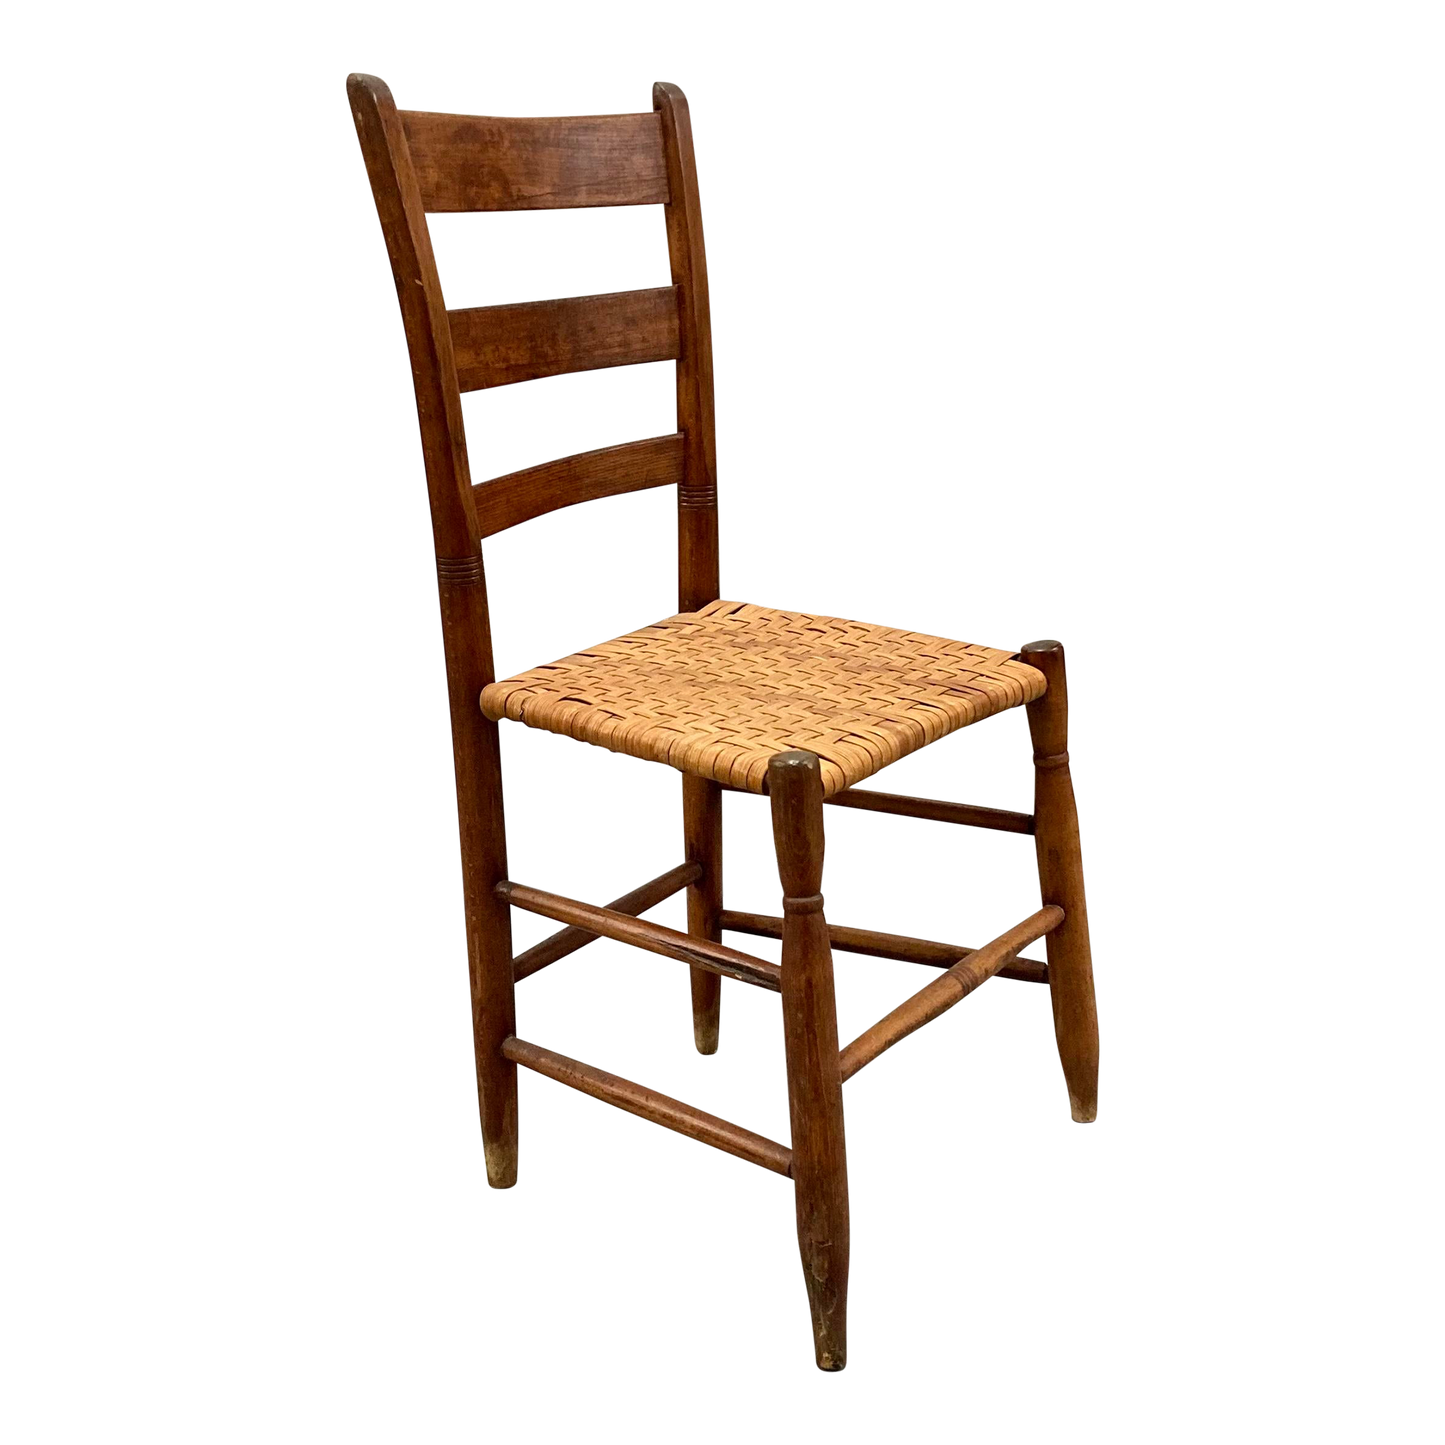 Antique Danish Rustic Shaker Style Woven Seat Chair